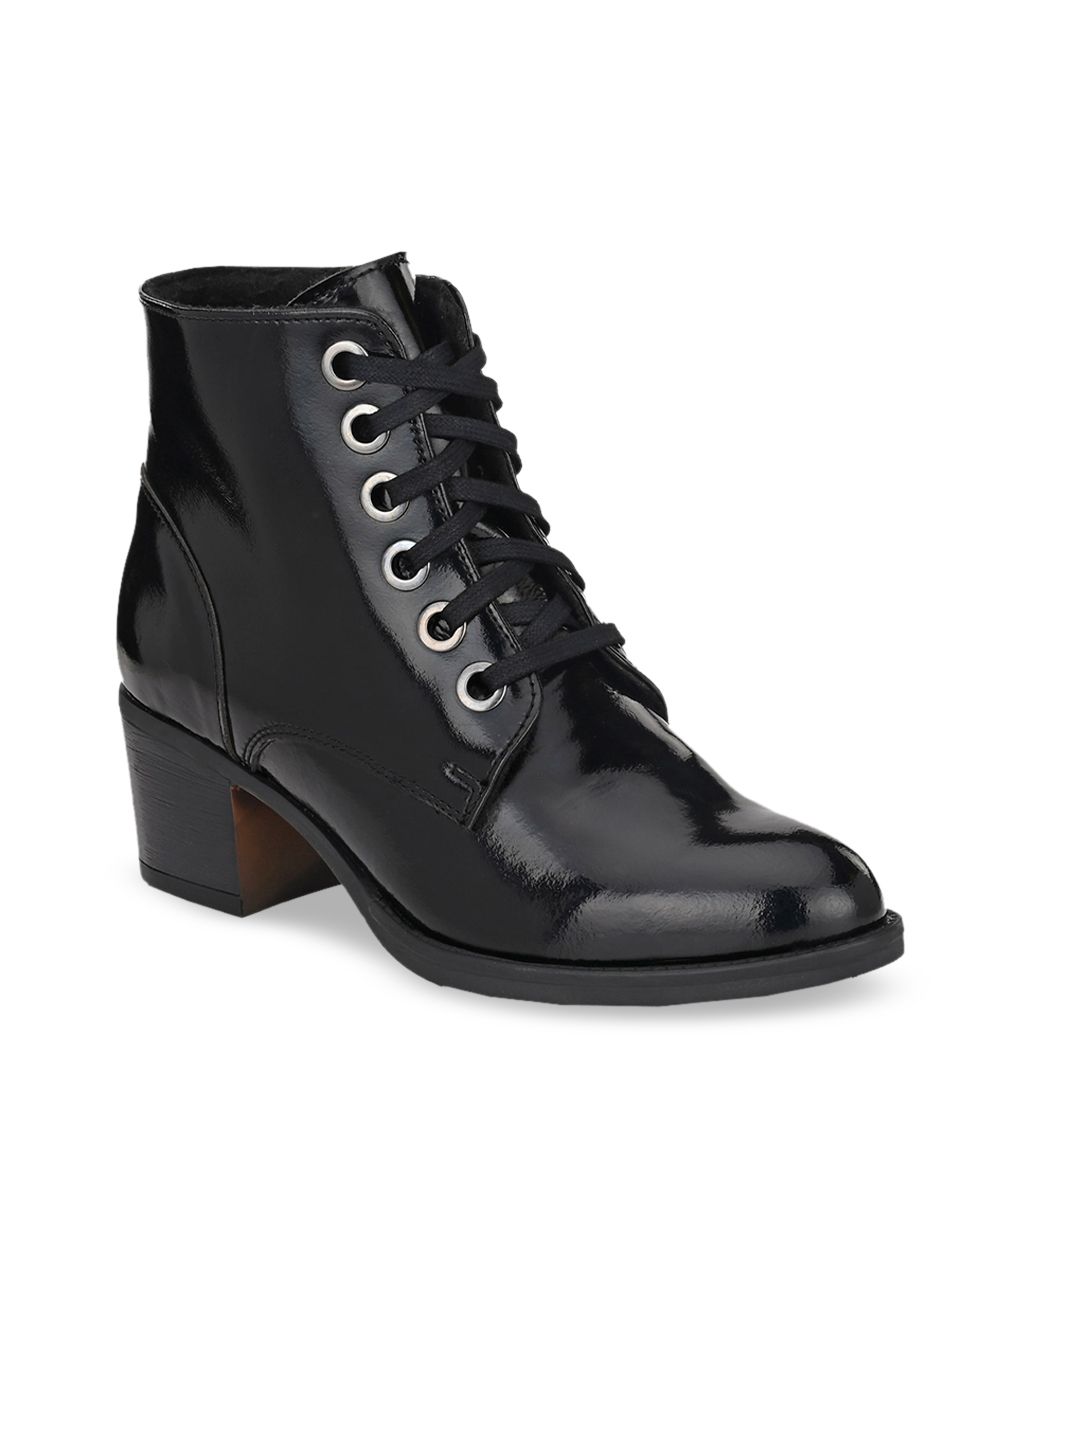 Delize Women Black Solid Leather High-Top Block Heeled Boots Price in India